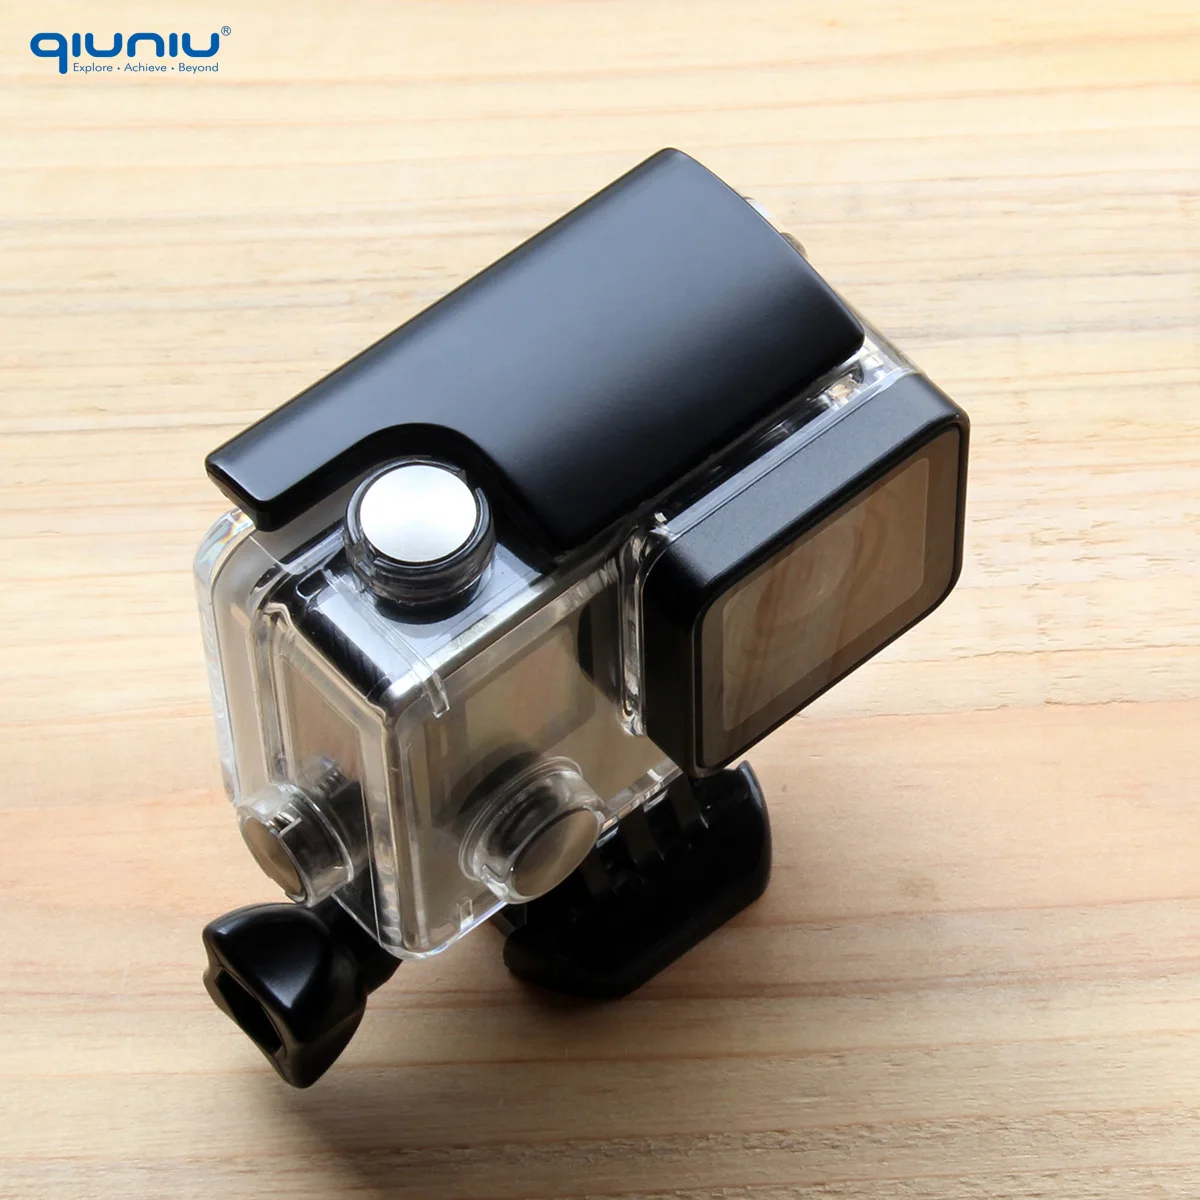 QIUNIU For GoPro 3+ 4 Accessories Plastic Snap Latch Replacement for Go Pro Hero 3+ Waterproof Housing Case Lock Buckle